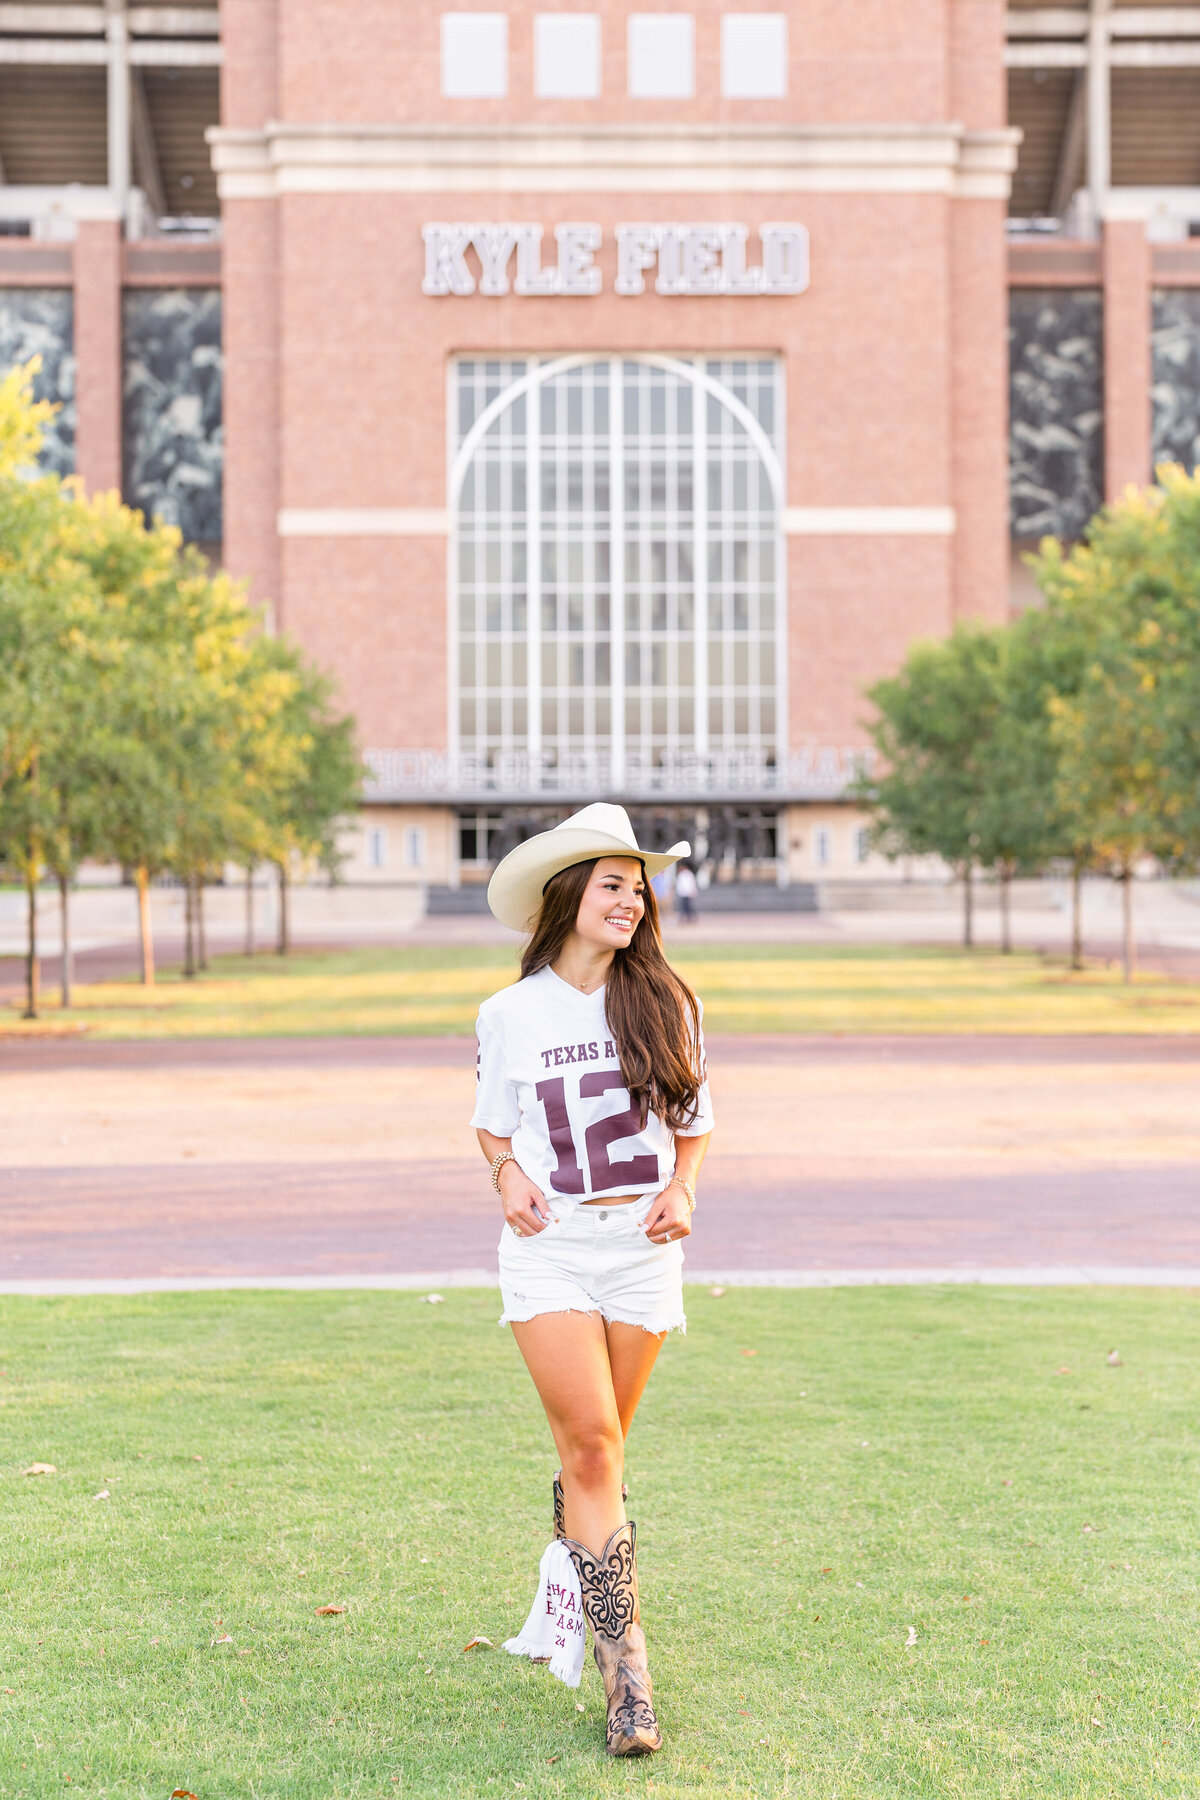 Texas A&M senior girl walking with hands in pockets and looking away while wearing cowboy hat, white Aggie jersey in front of Kyle Field at Aggie Park